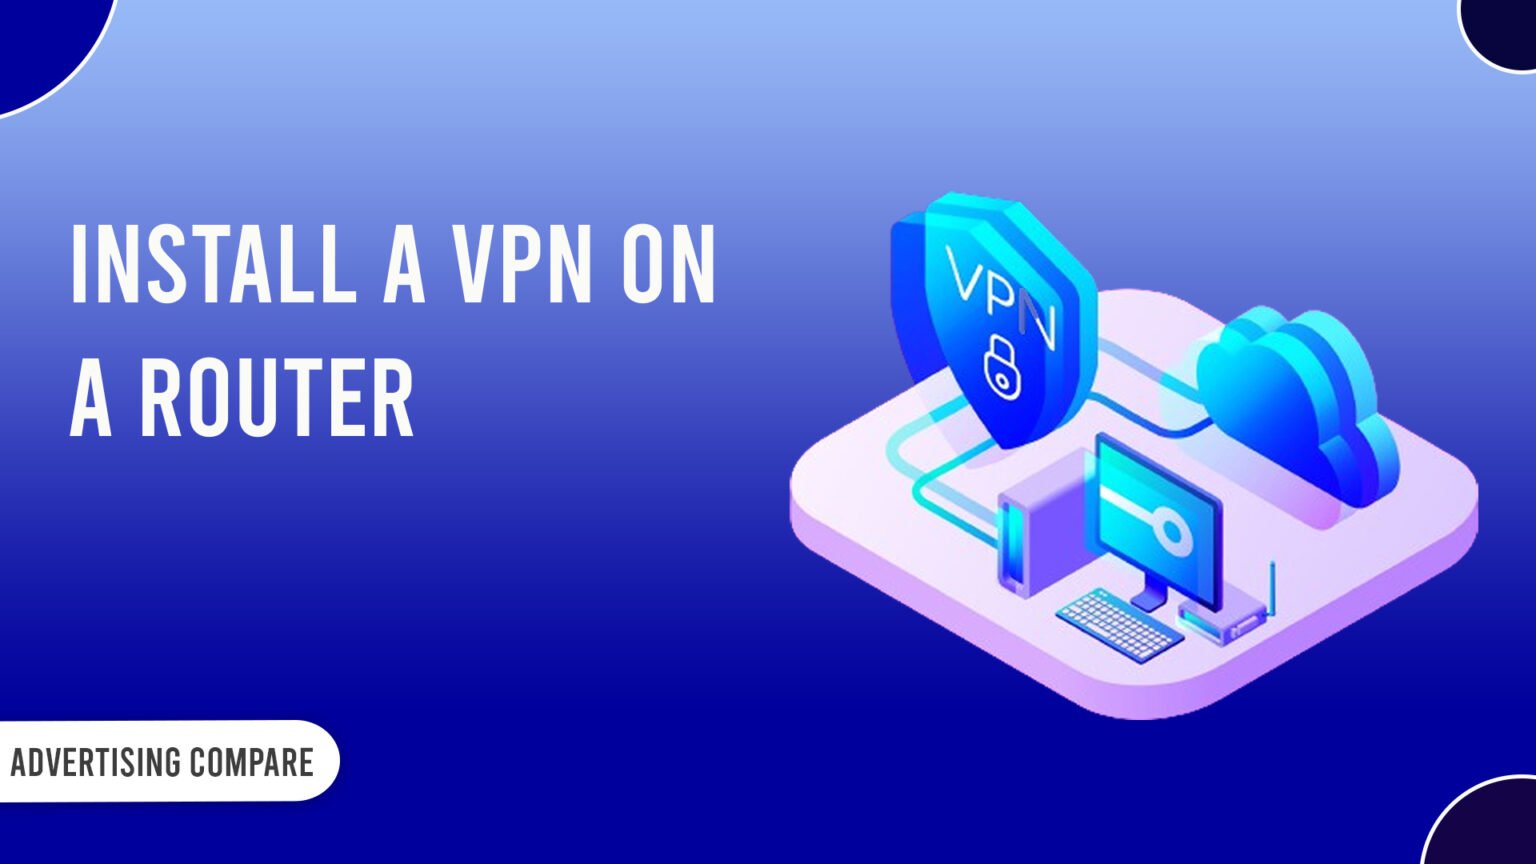 How To Install A VPN On a Router www.theadcompare.com